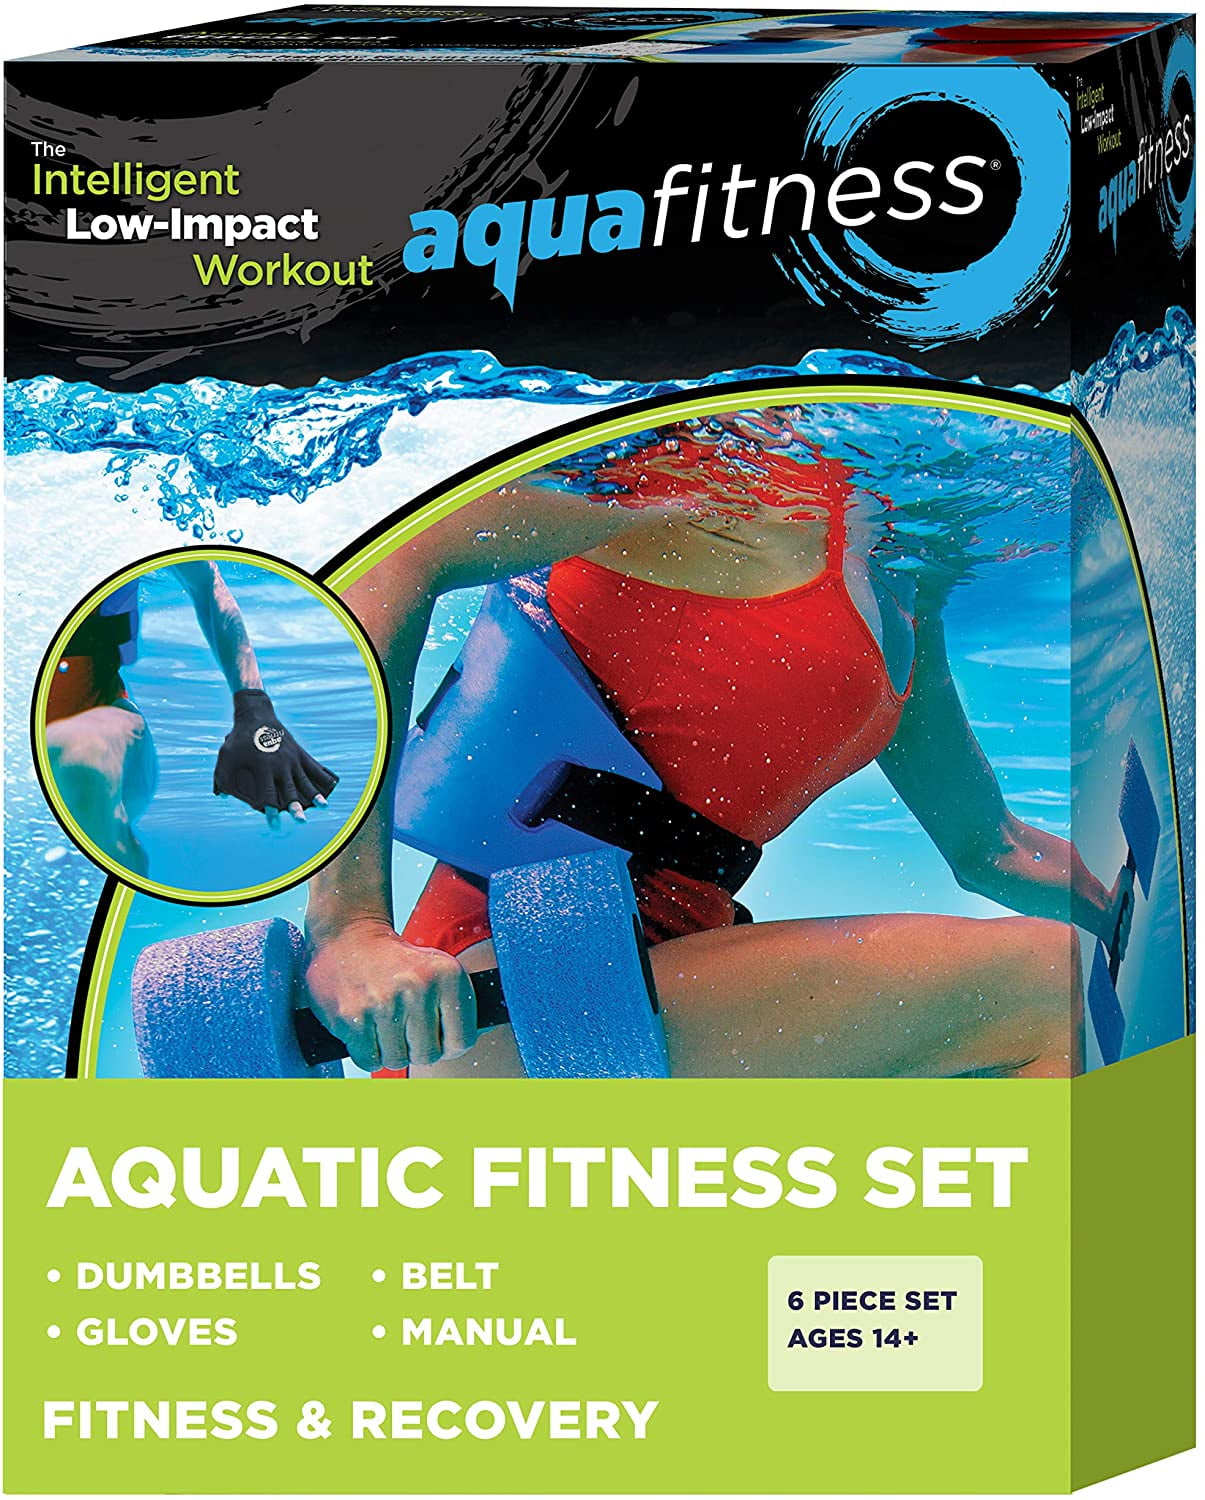 Water Weights for Water Aerobics Premium Water Aerobics Equipment Weights for Exercises RIMSports Water Dumbbells Weights for Pool Exercise Exercise & Fitness Dumbbells & Swimming Pool Accessories